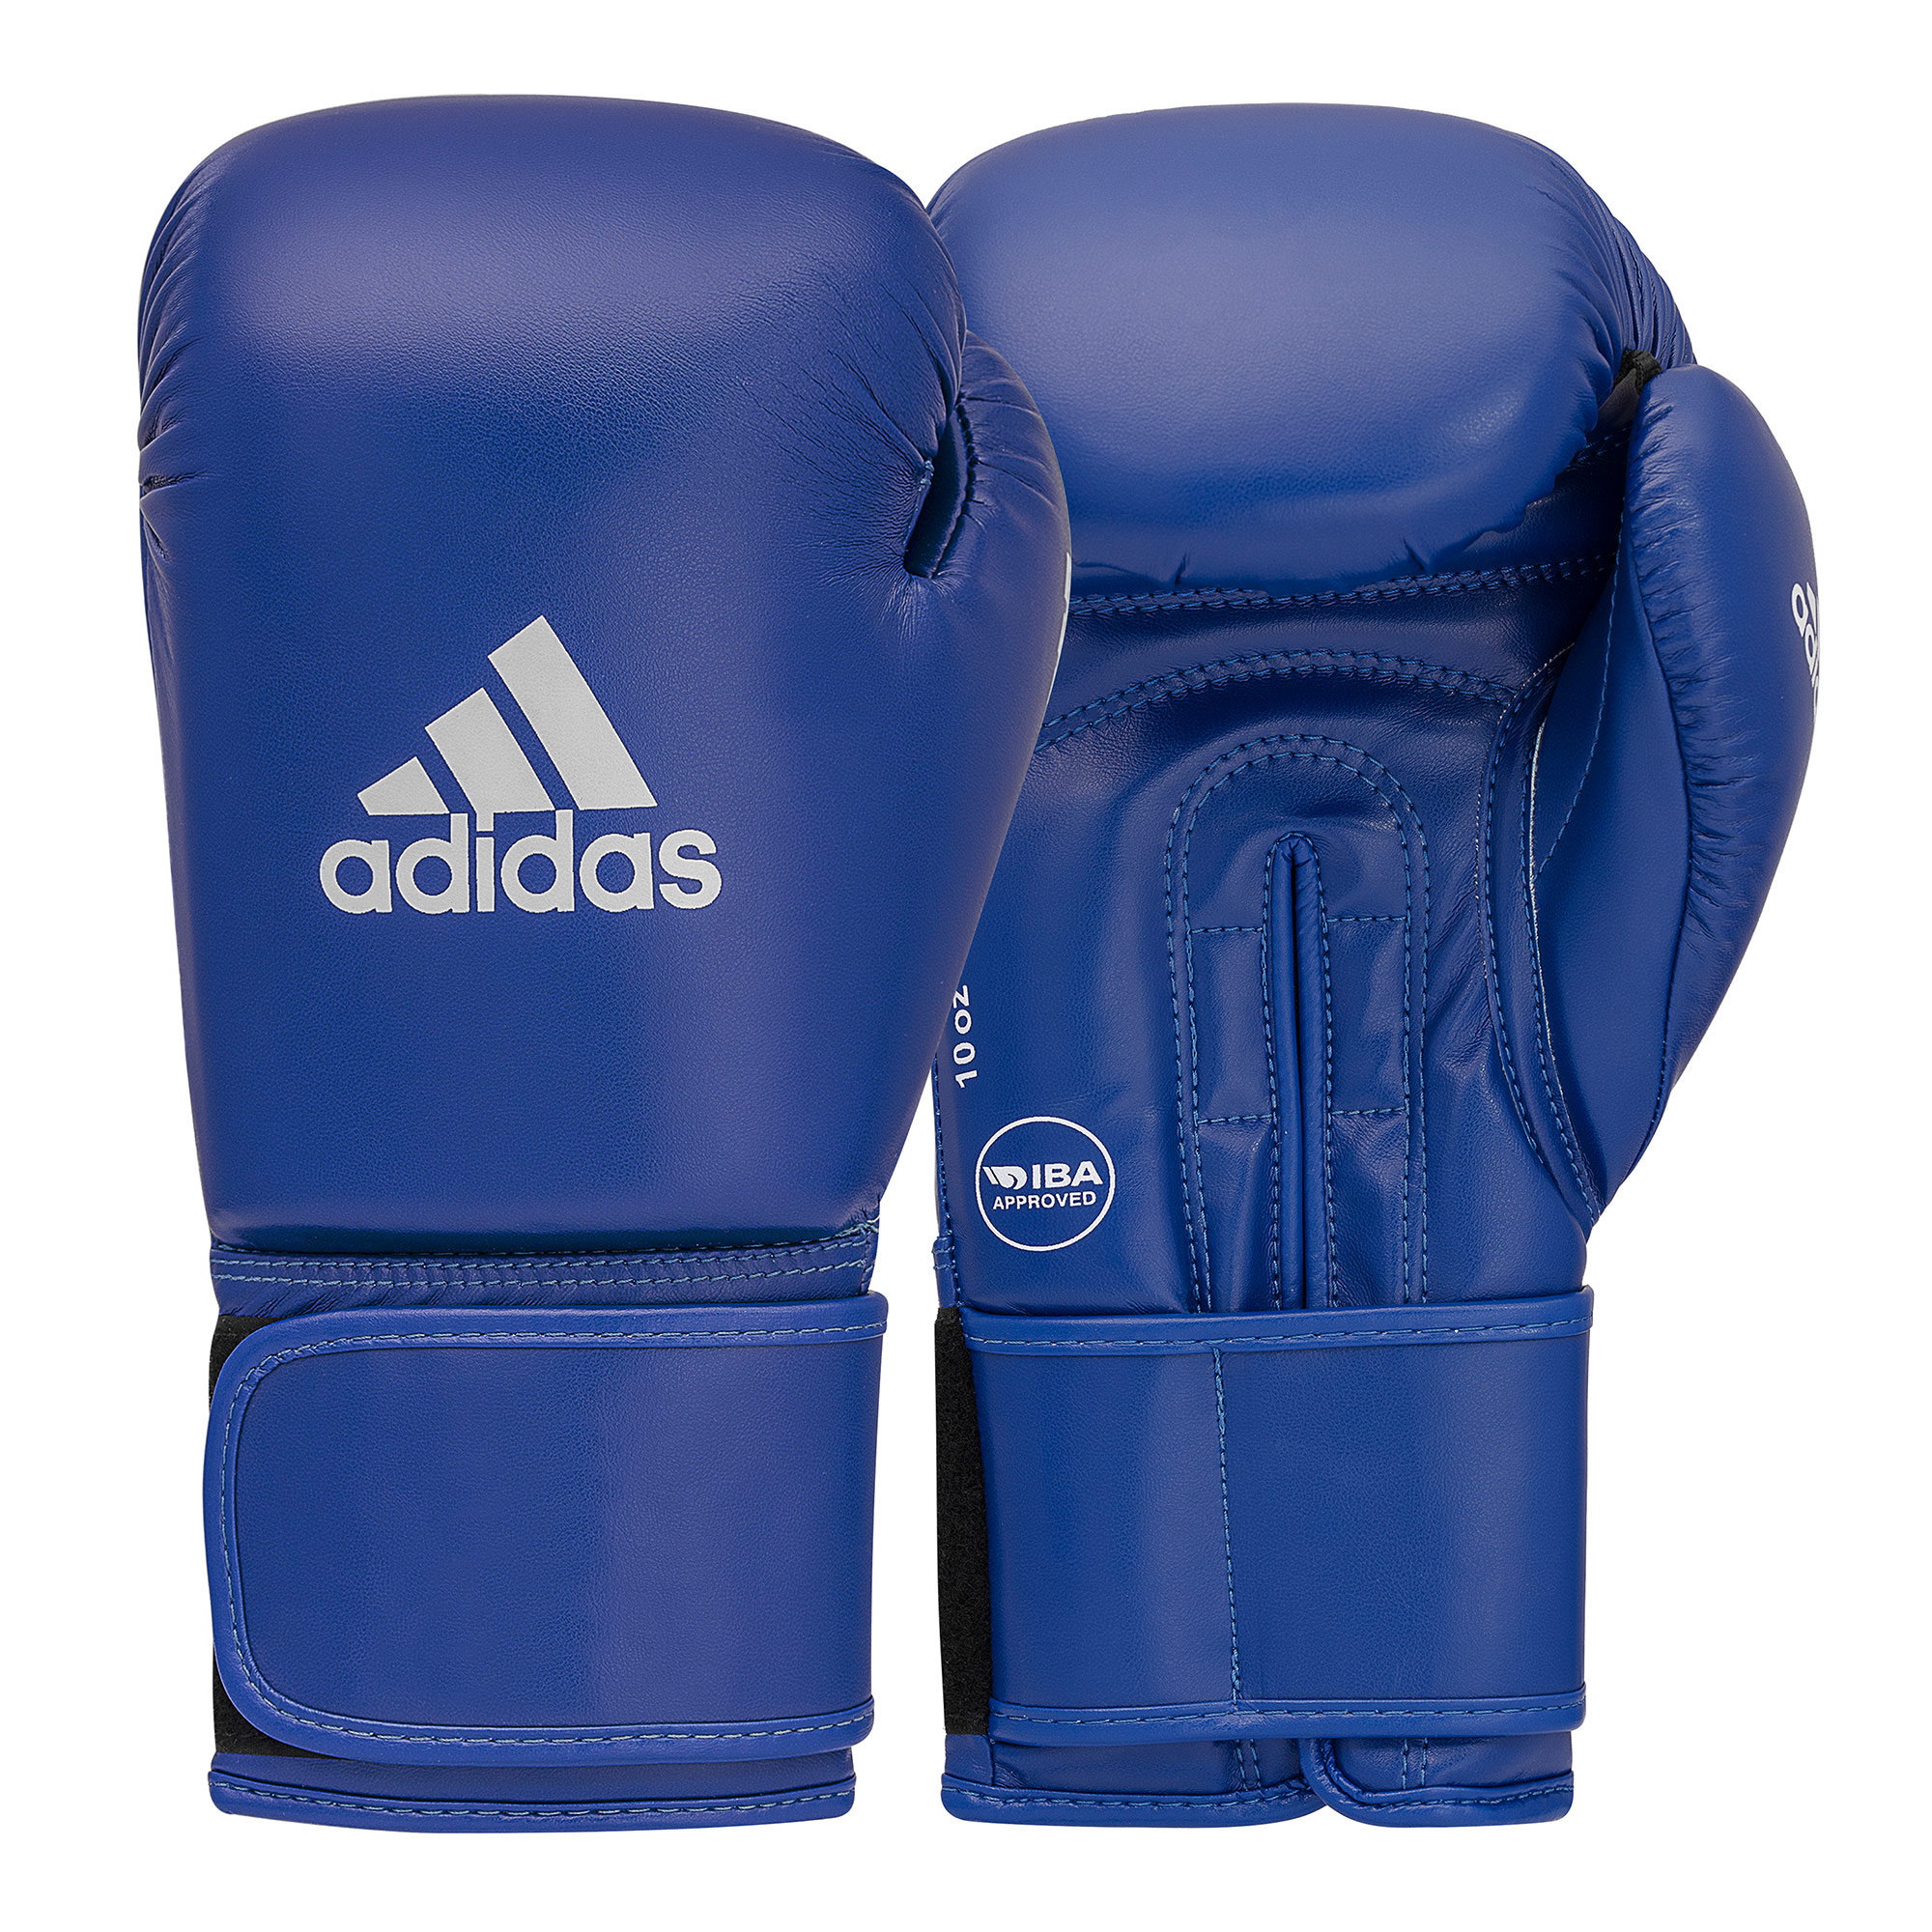 ADIDAS IBA APPROVED AMATEUR COMPETITION BOXING AND KICKBOXING GLOVES